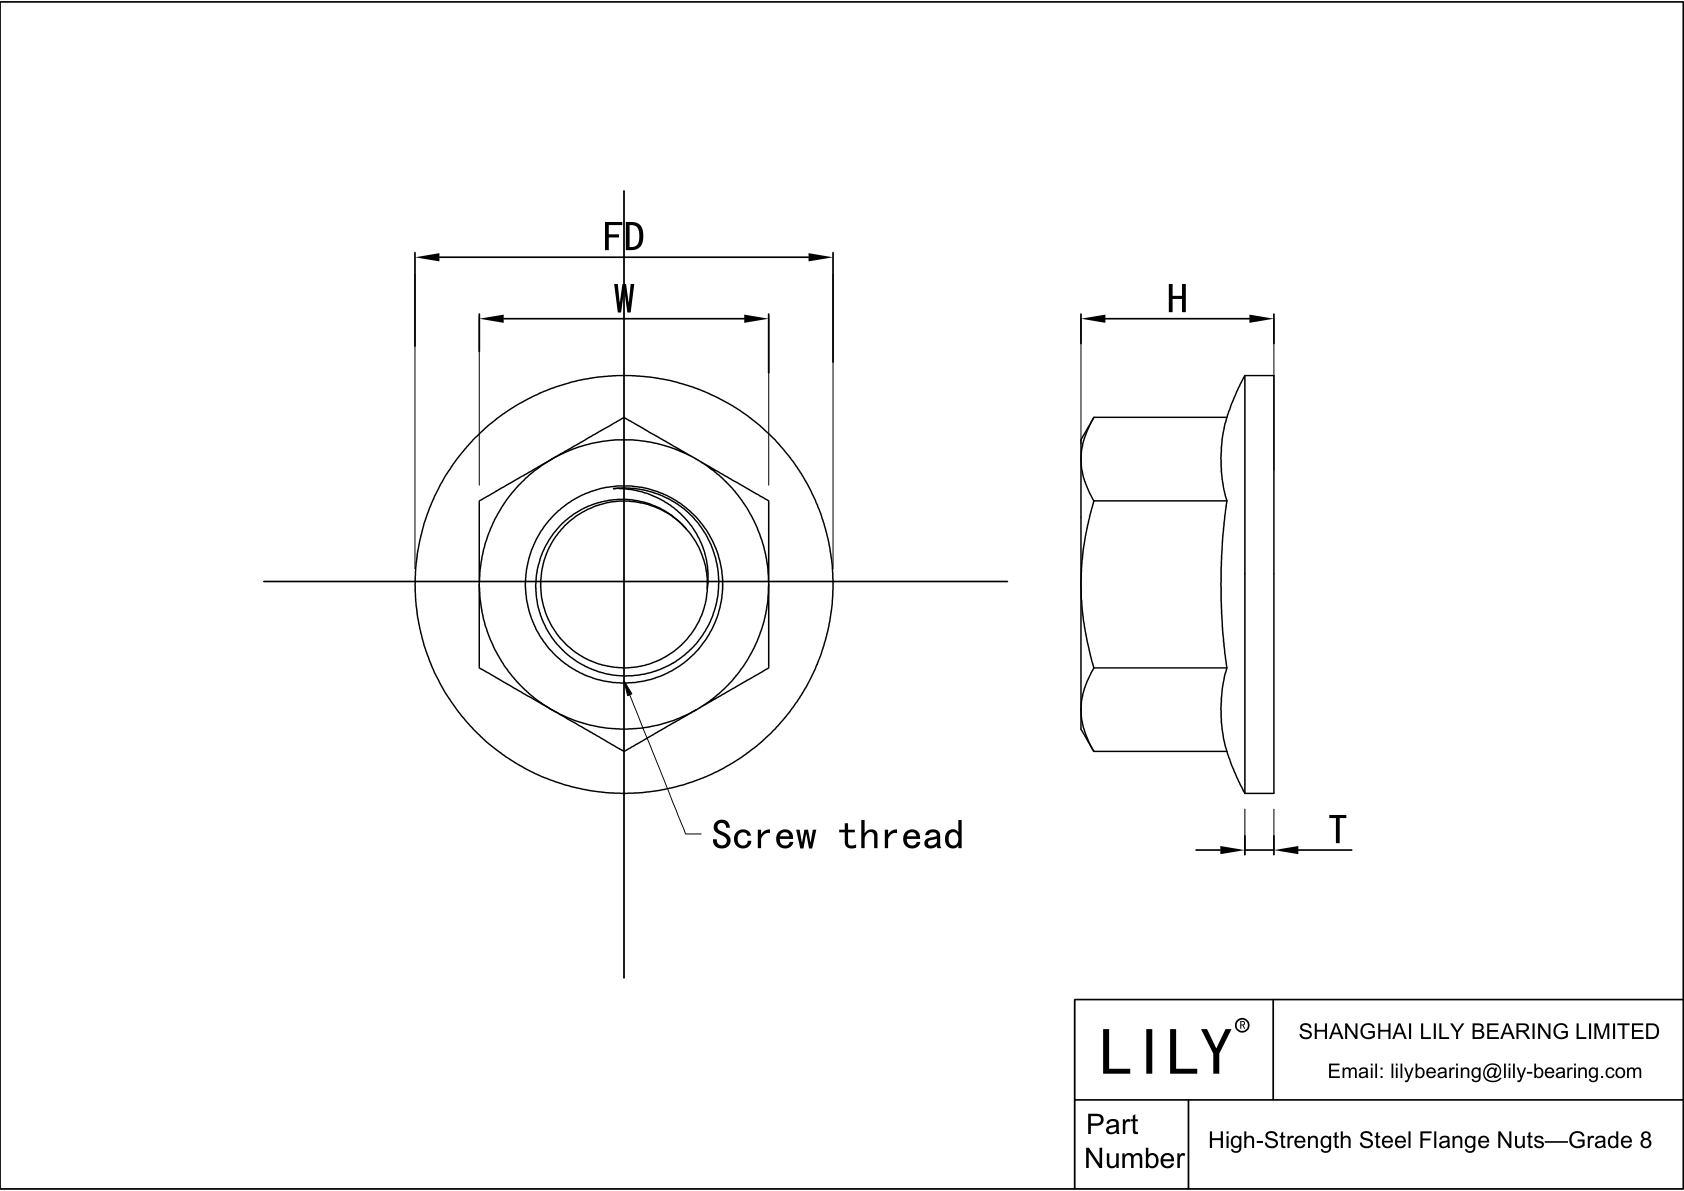 JEJACABBC High-Strength Steel Flange Nuts—Grade 8 cad drawing